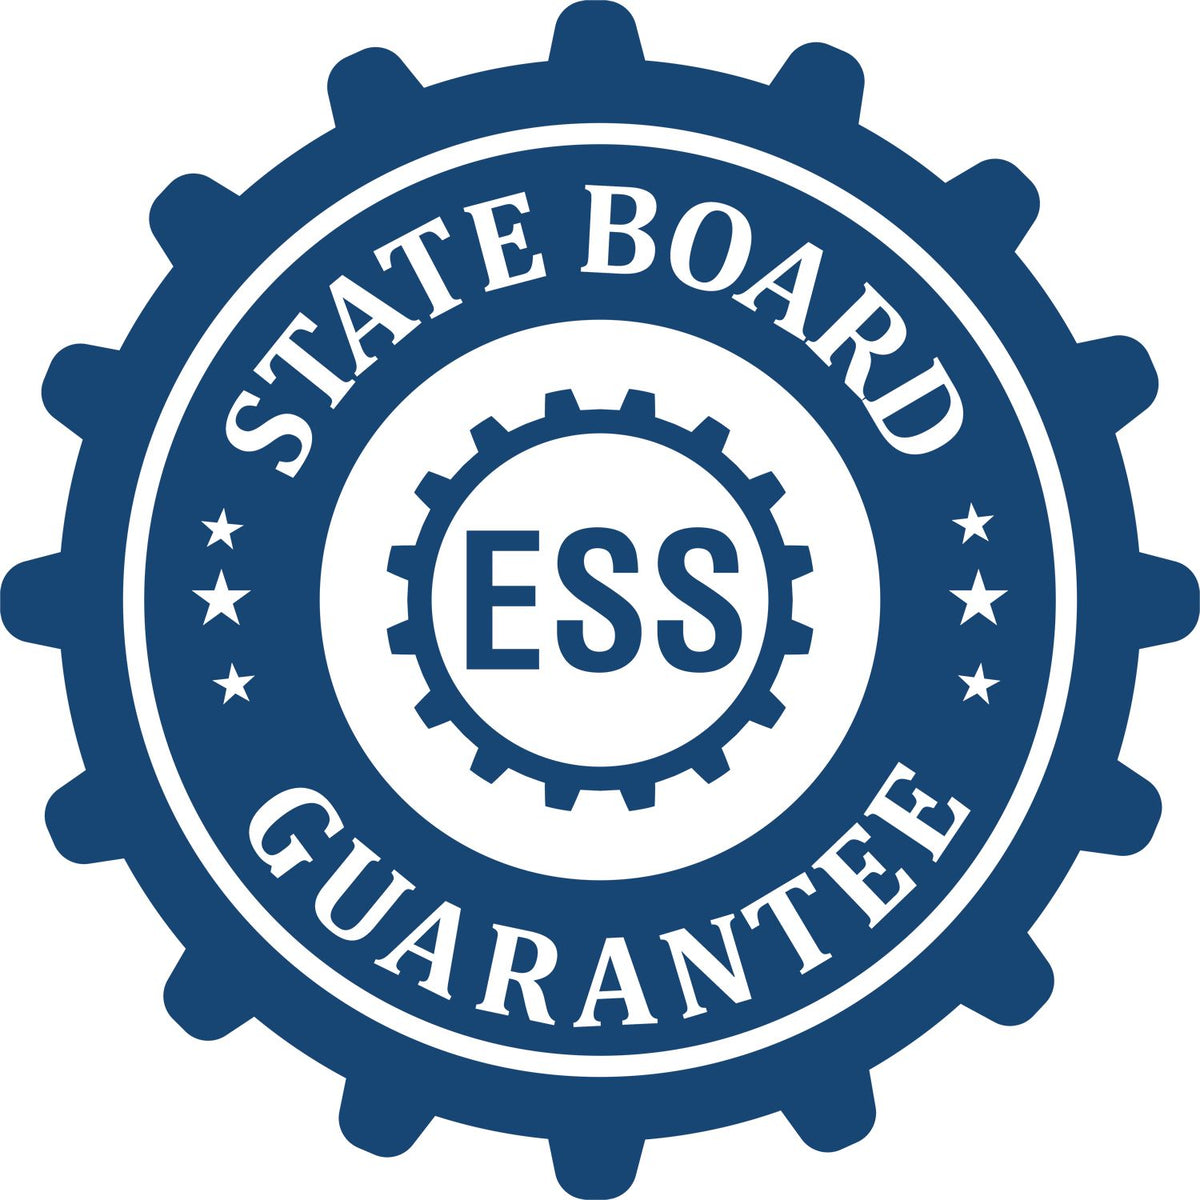 An emblem in a gear shape illustrating a state board guarantee for the Gift Iowa Landscape Architect Seal